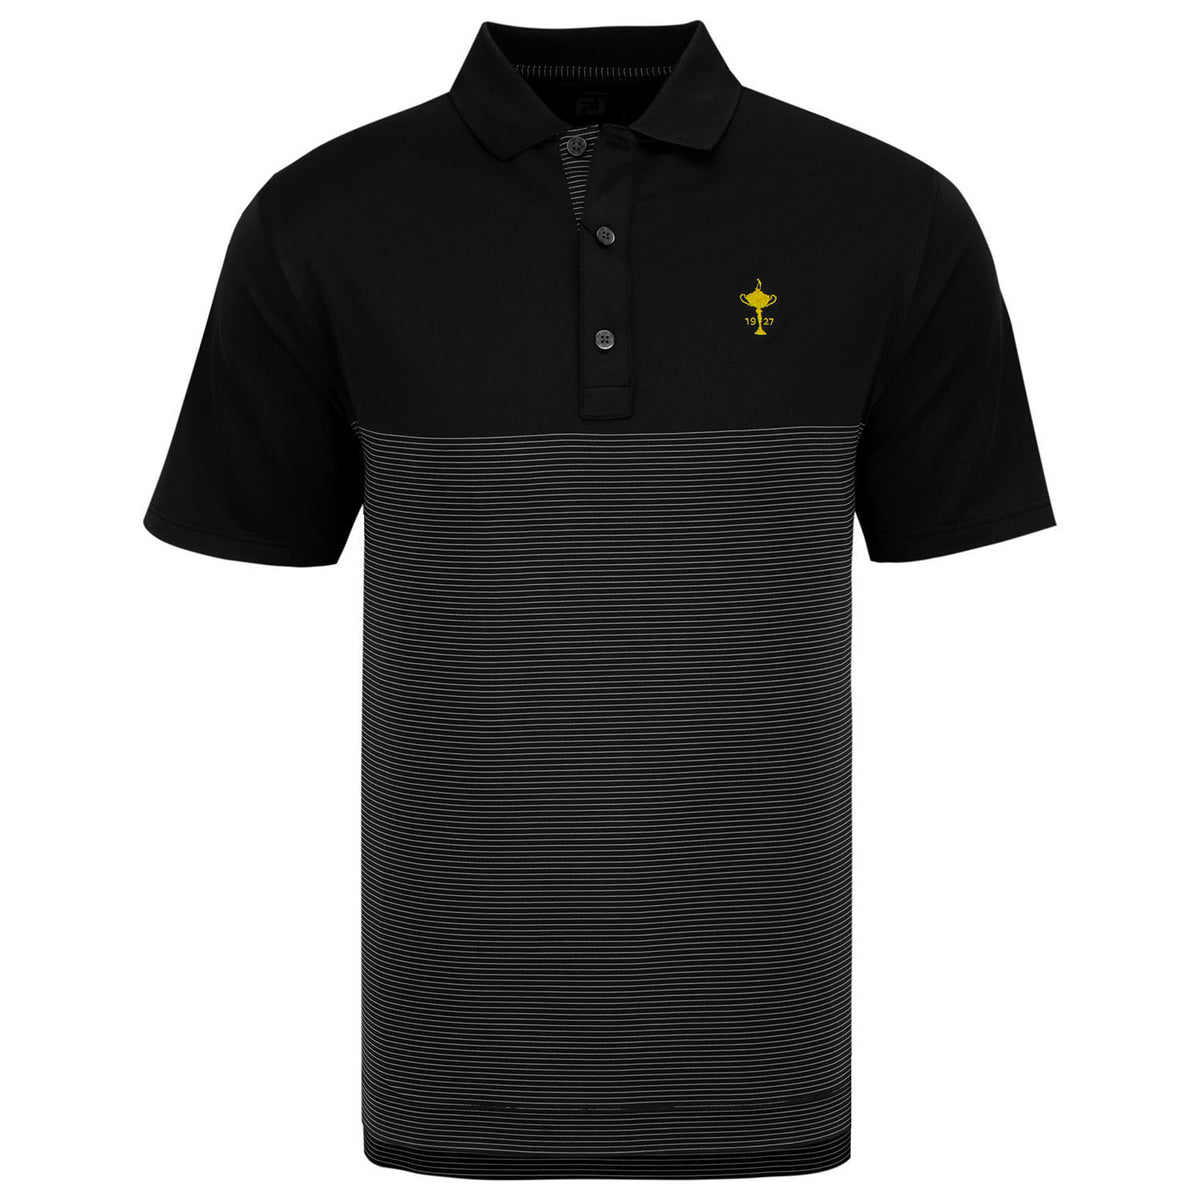 FootJoy Engineered Pin Stripe Polo in Black- Front View